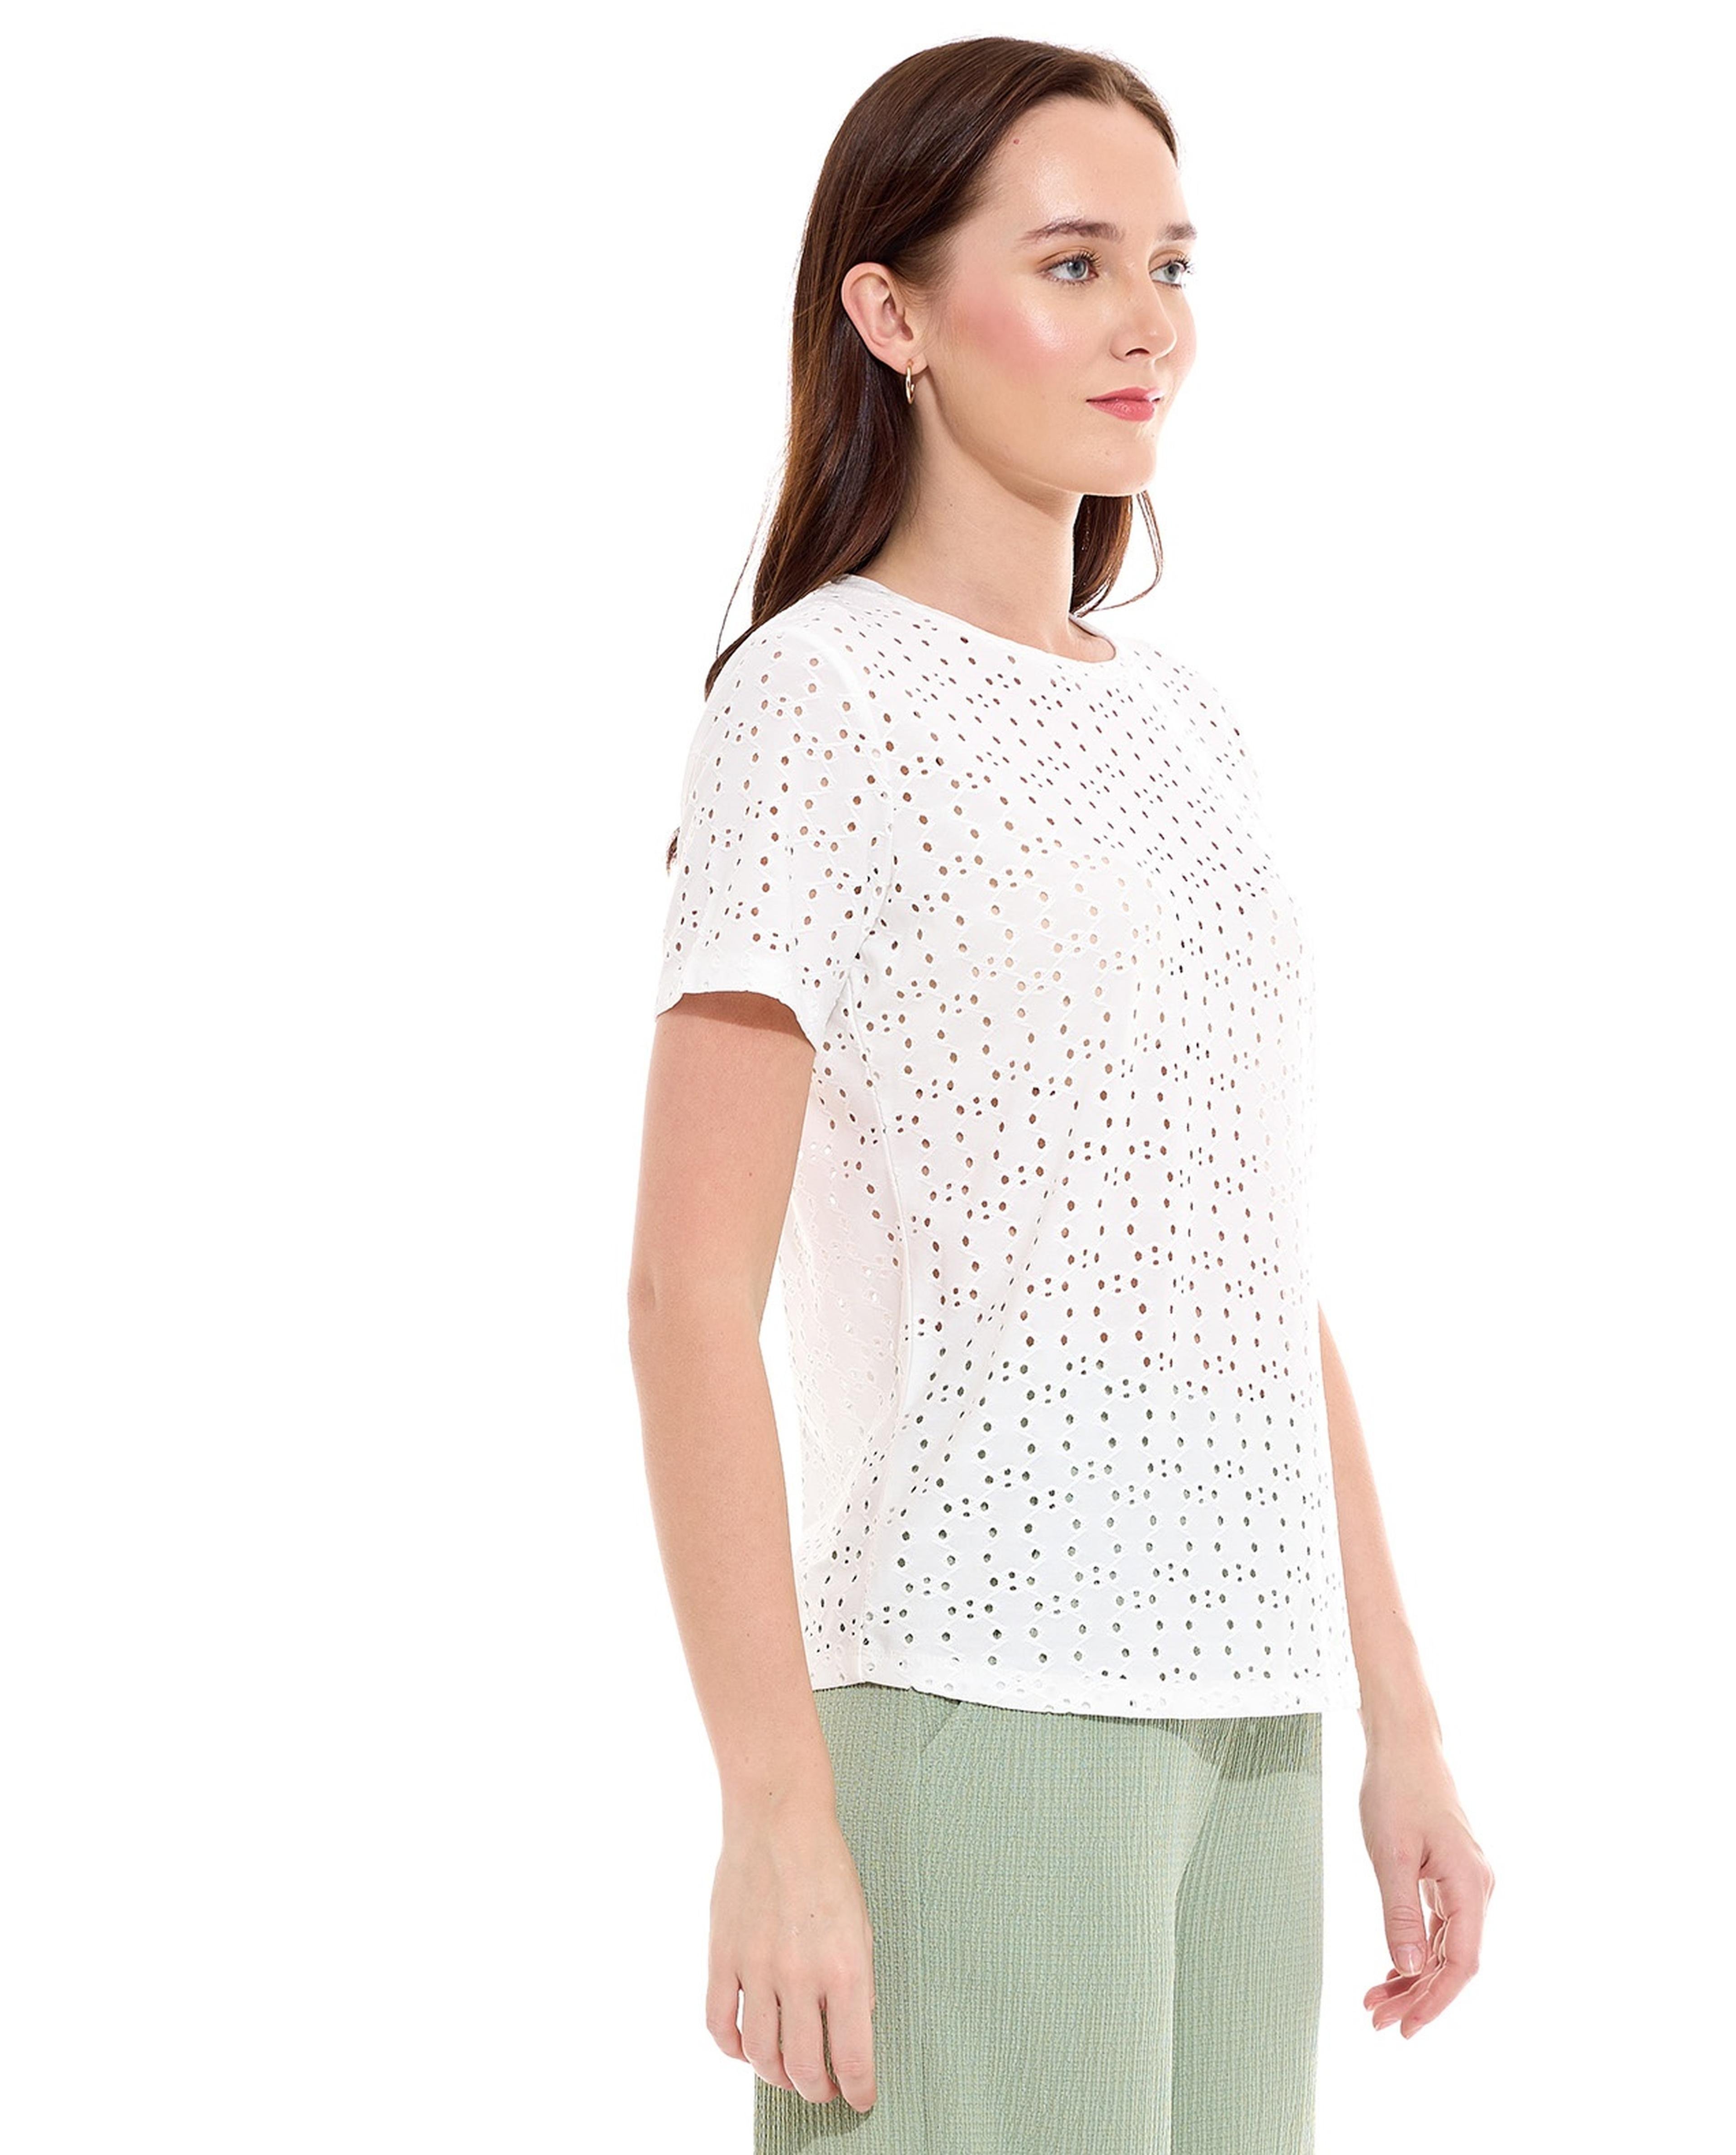 Openwork Top with Crew Neck and Short Sleeves